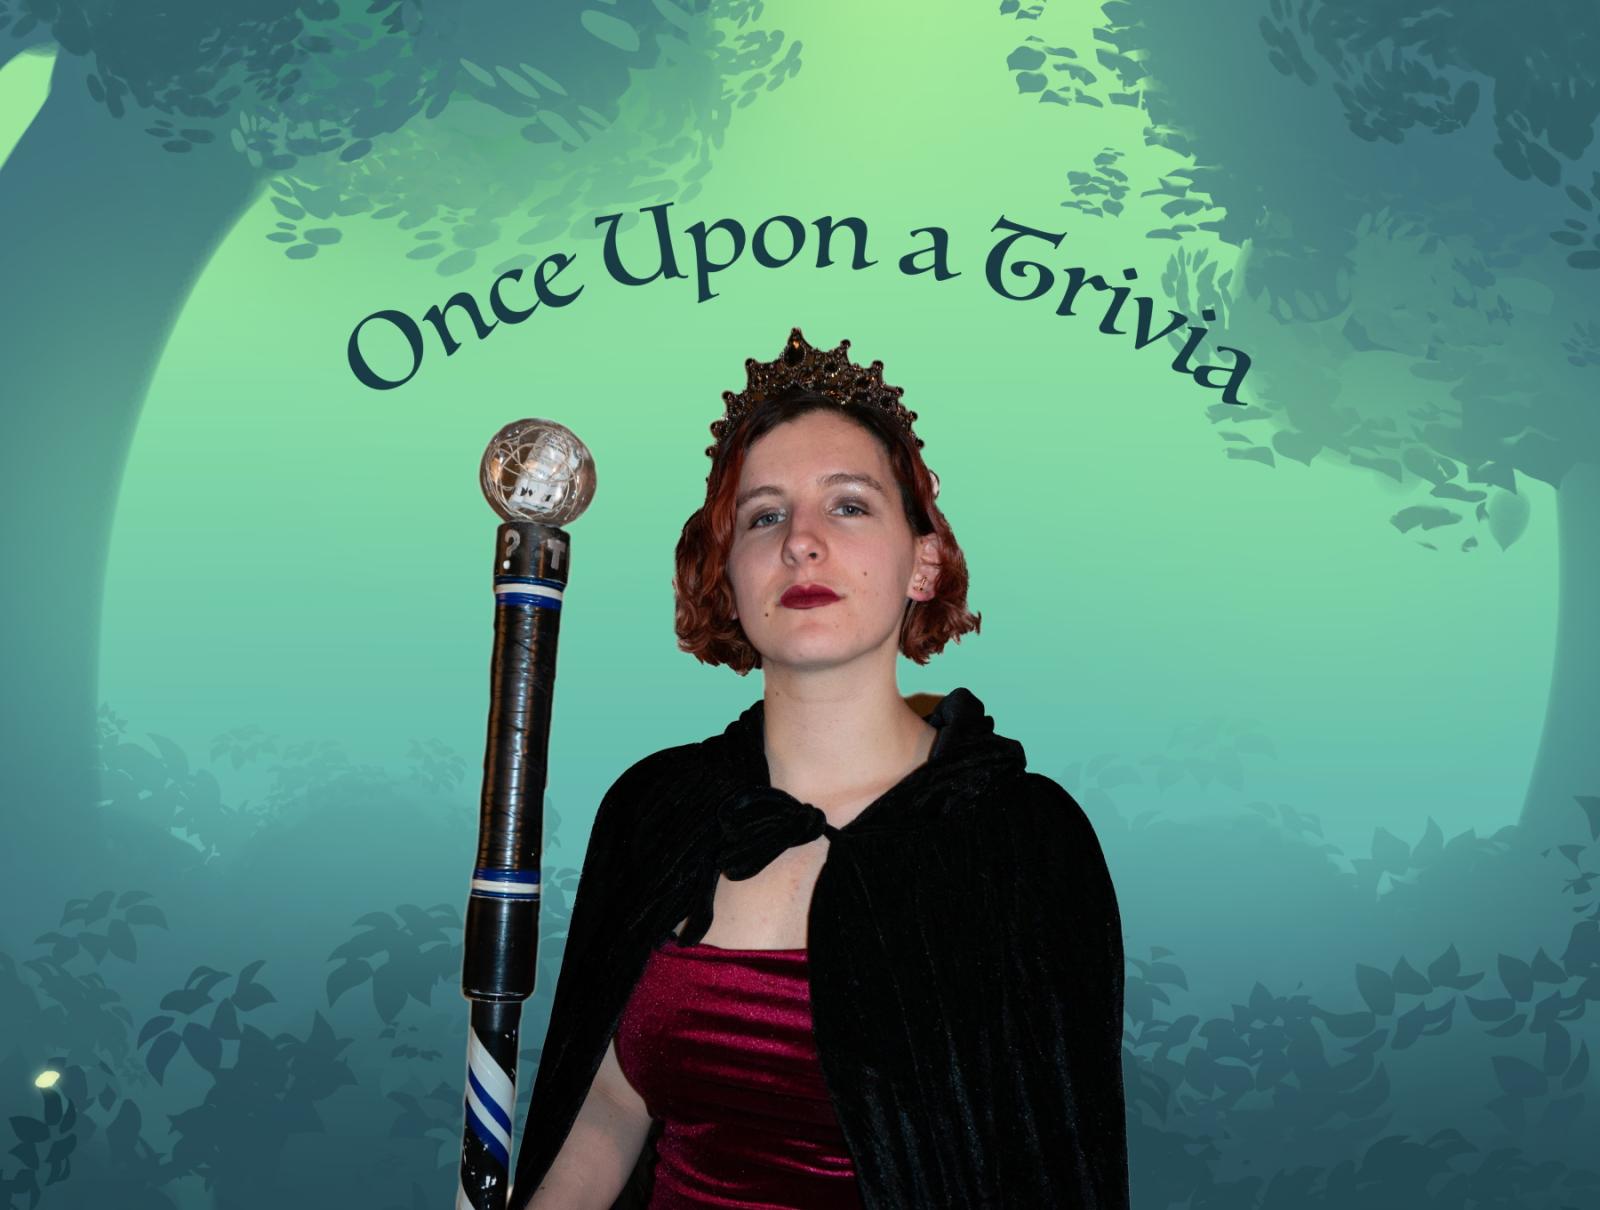 Maddie Guest poses for a photo in an illustration with the words "Once Upon a Trivia"